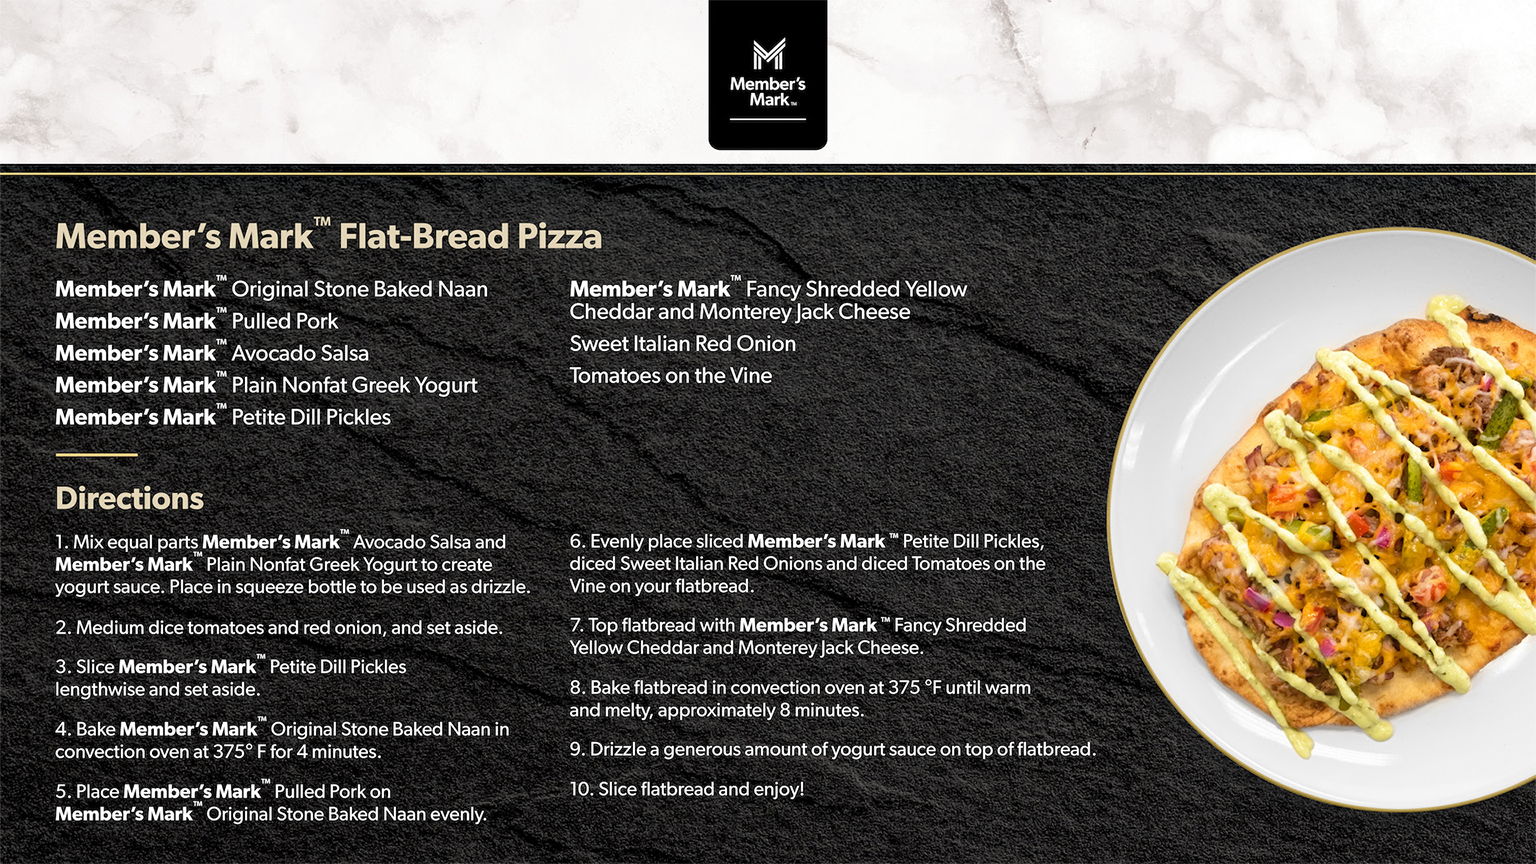 Ingredients and recipe for Member’s Mark Flatbread Pizza.